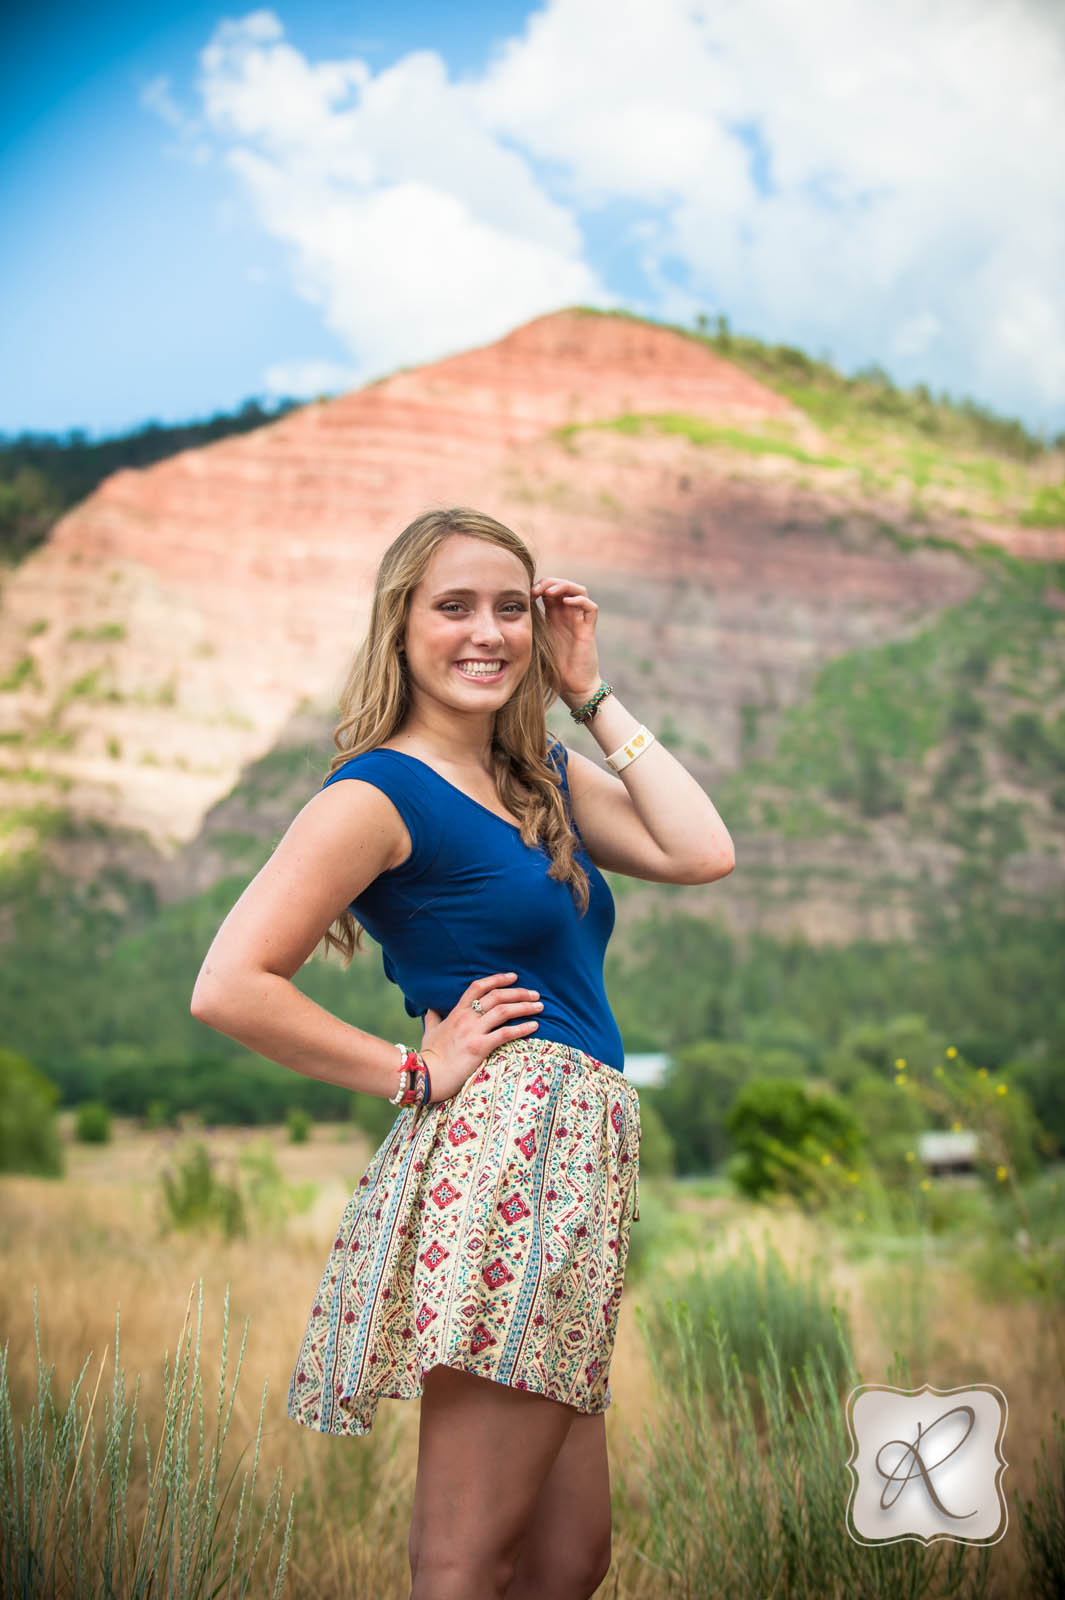 Carley | Senior Pictures with professional hair and make up - Durango